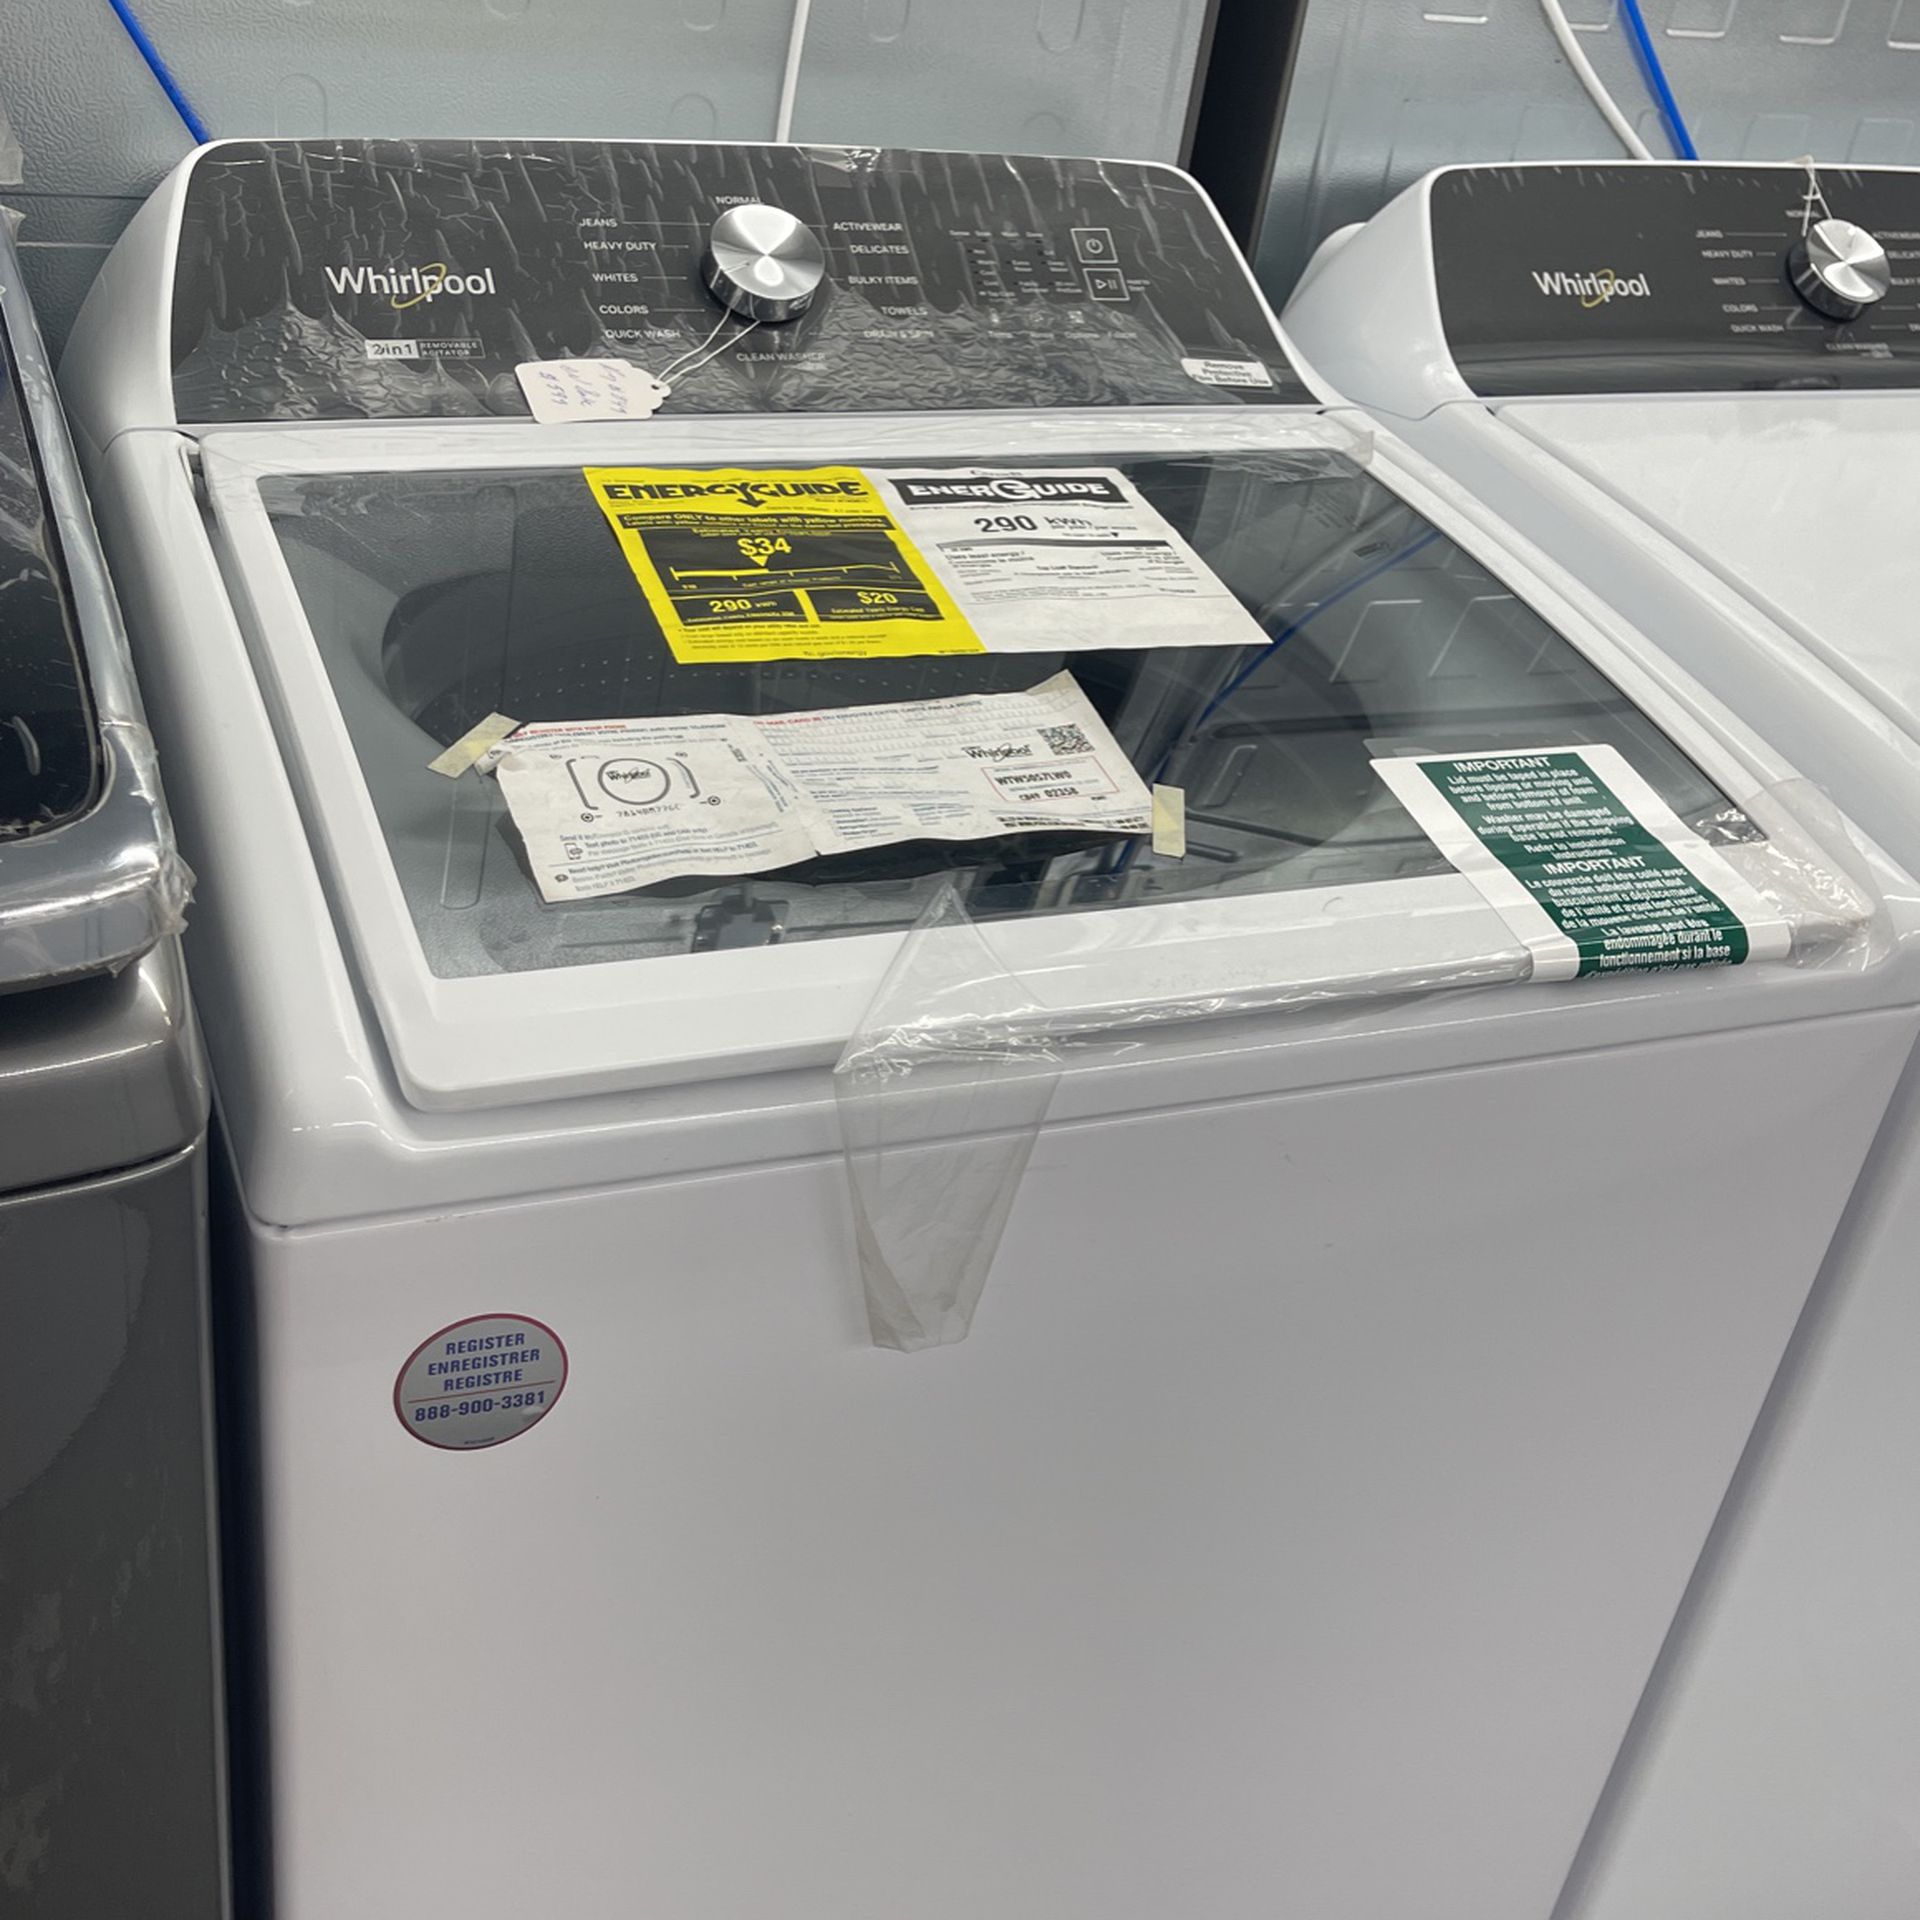 New Scratch And Dent Whirlpool Washer. 1 Year Warranty 